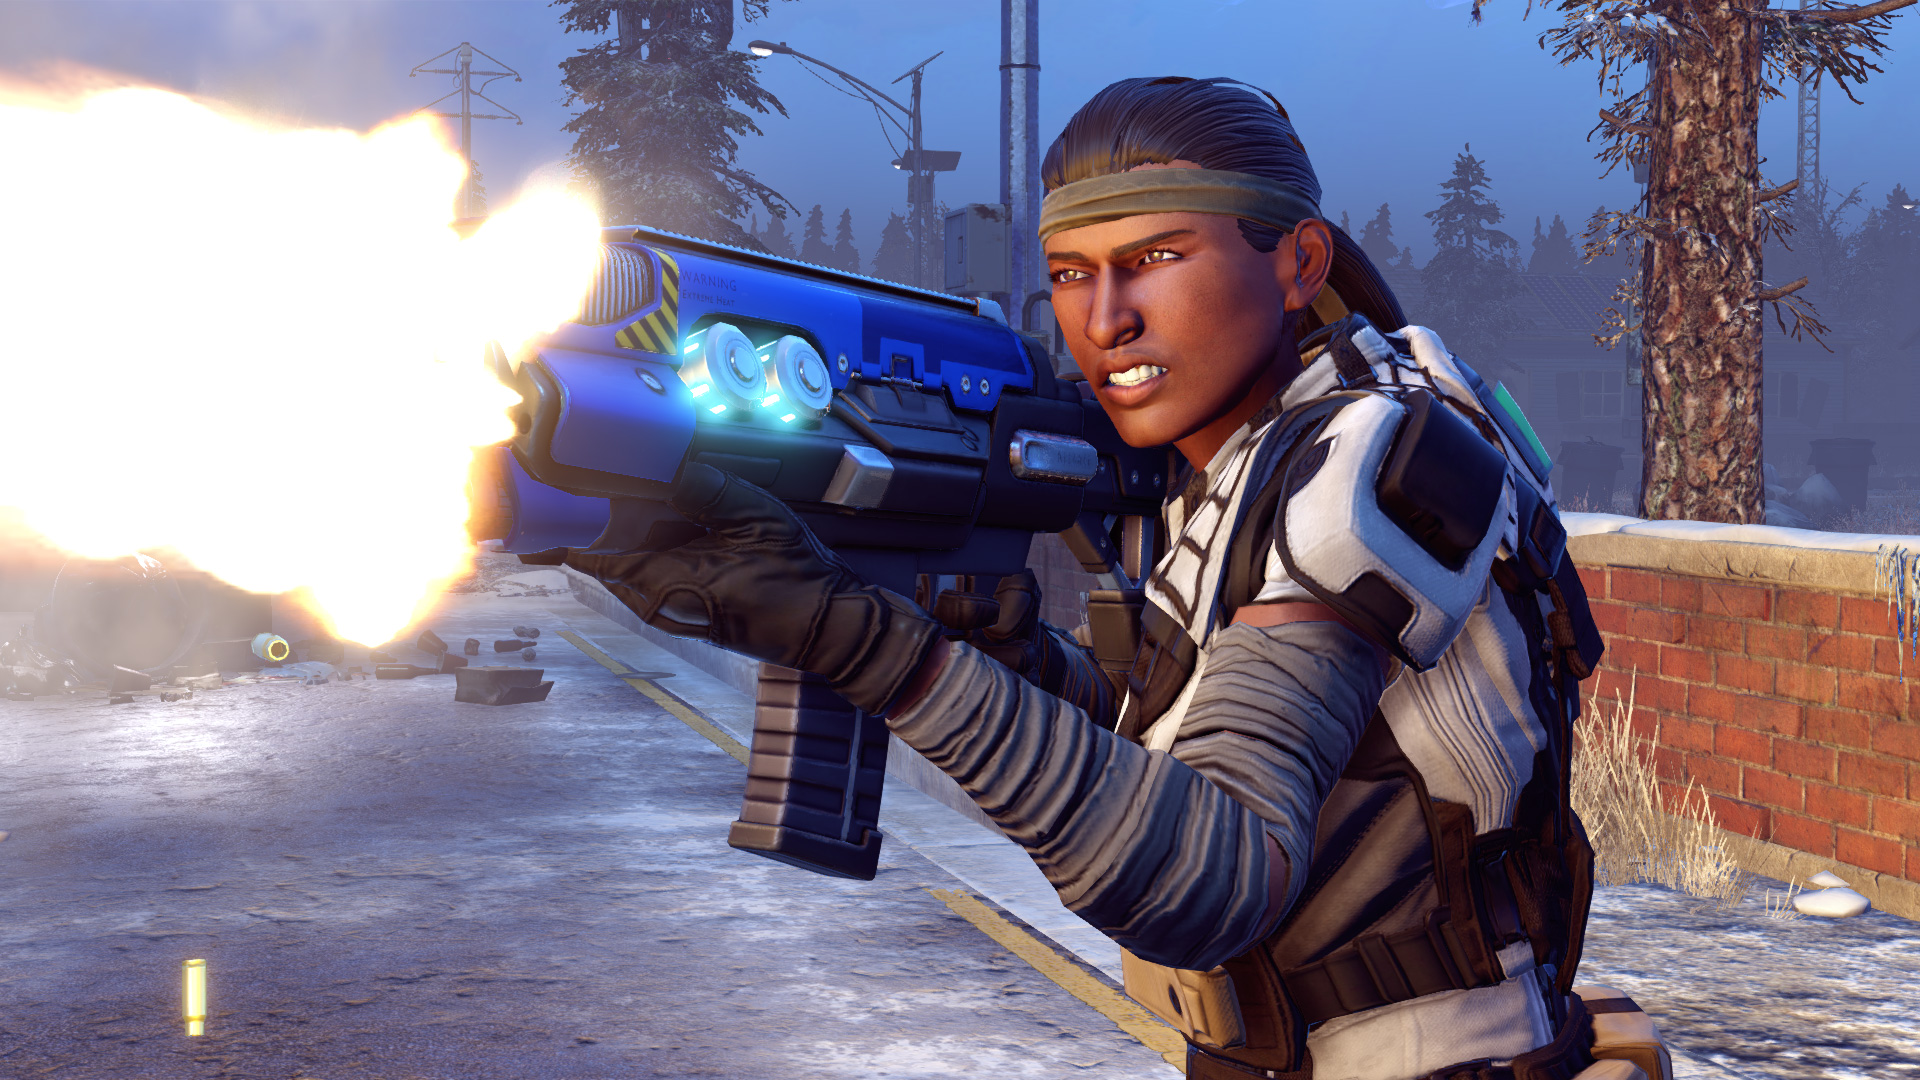  Take-Two confirms it's announcing a new game soon. Will it be Marvel XCOM? 